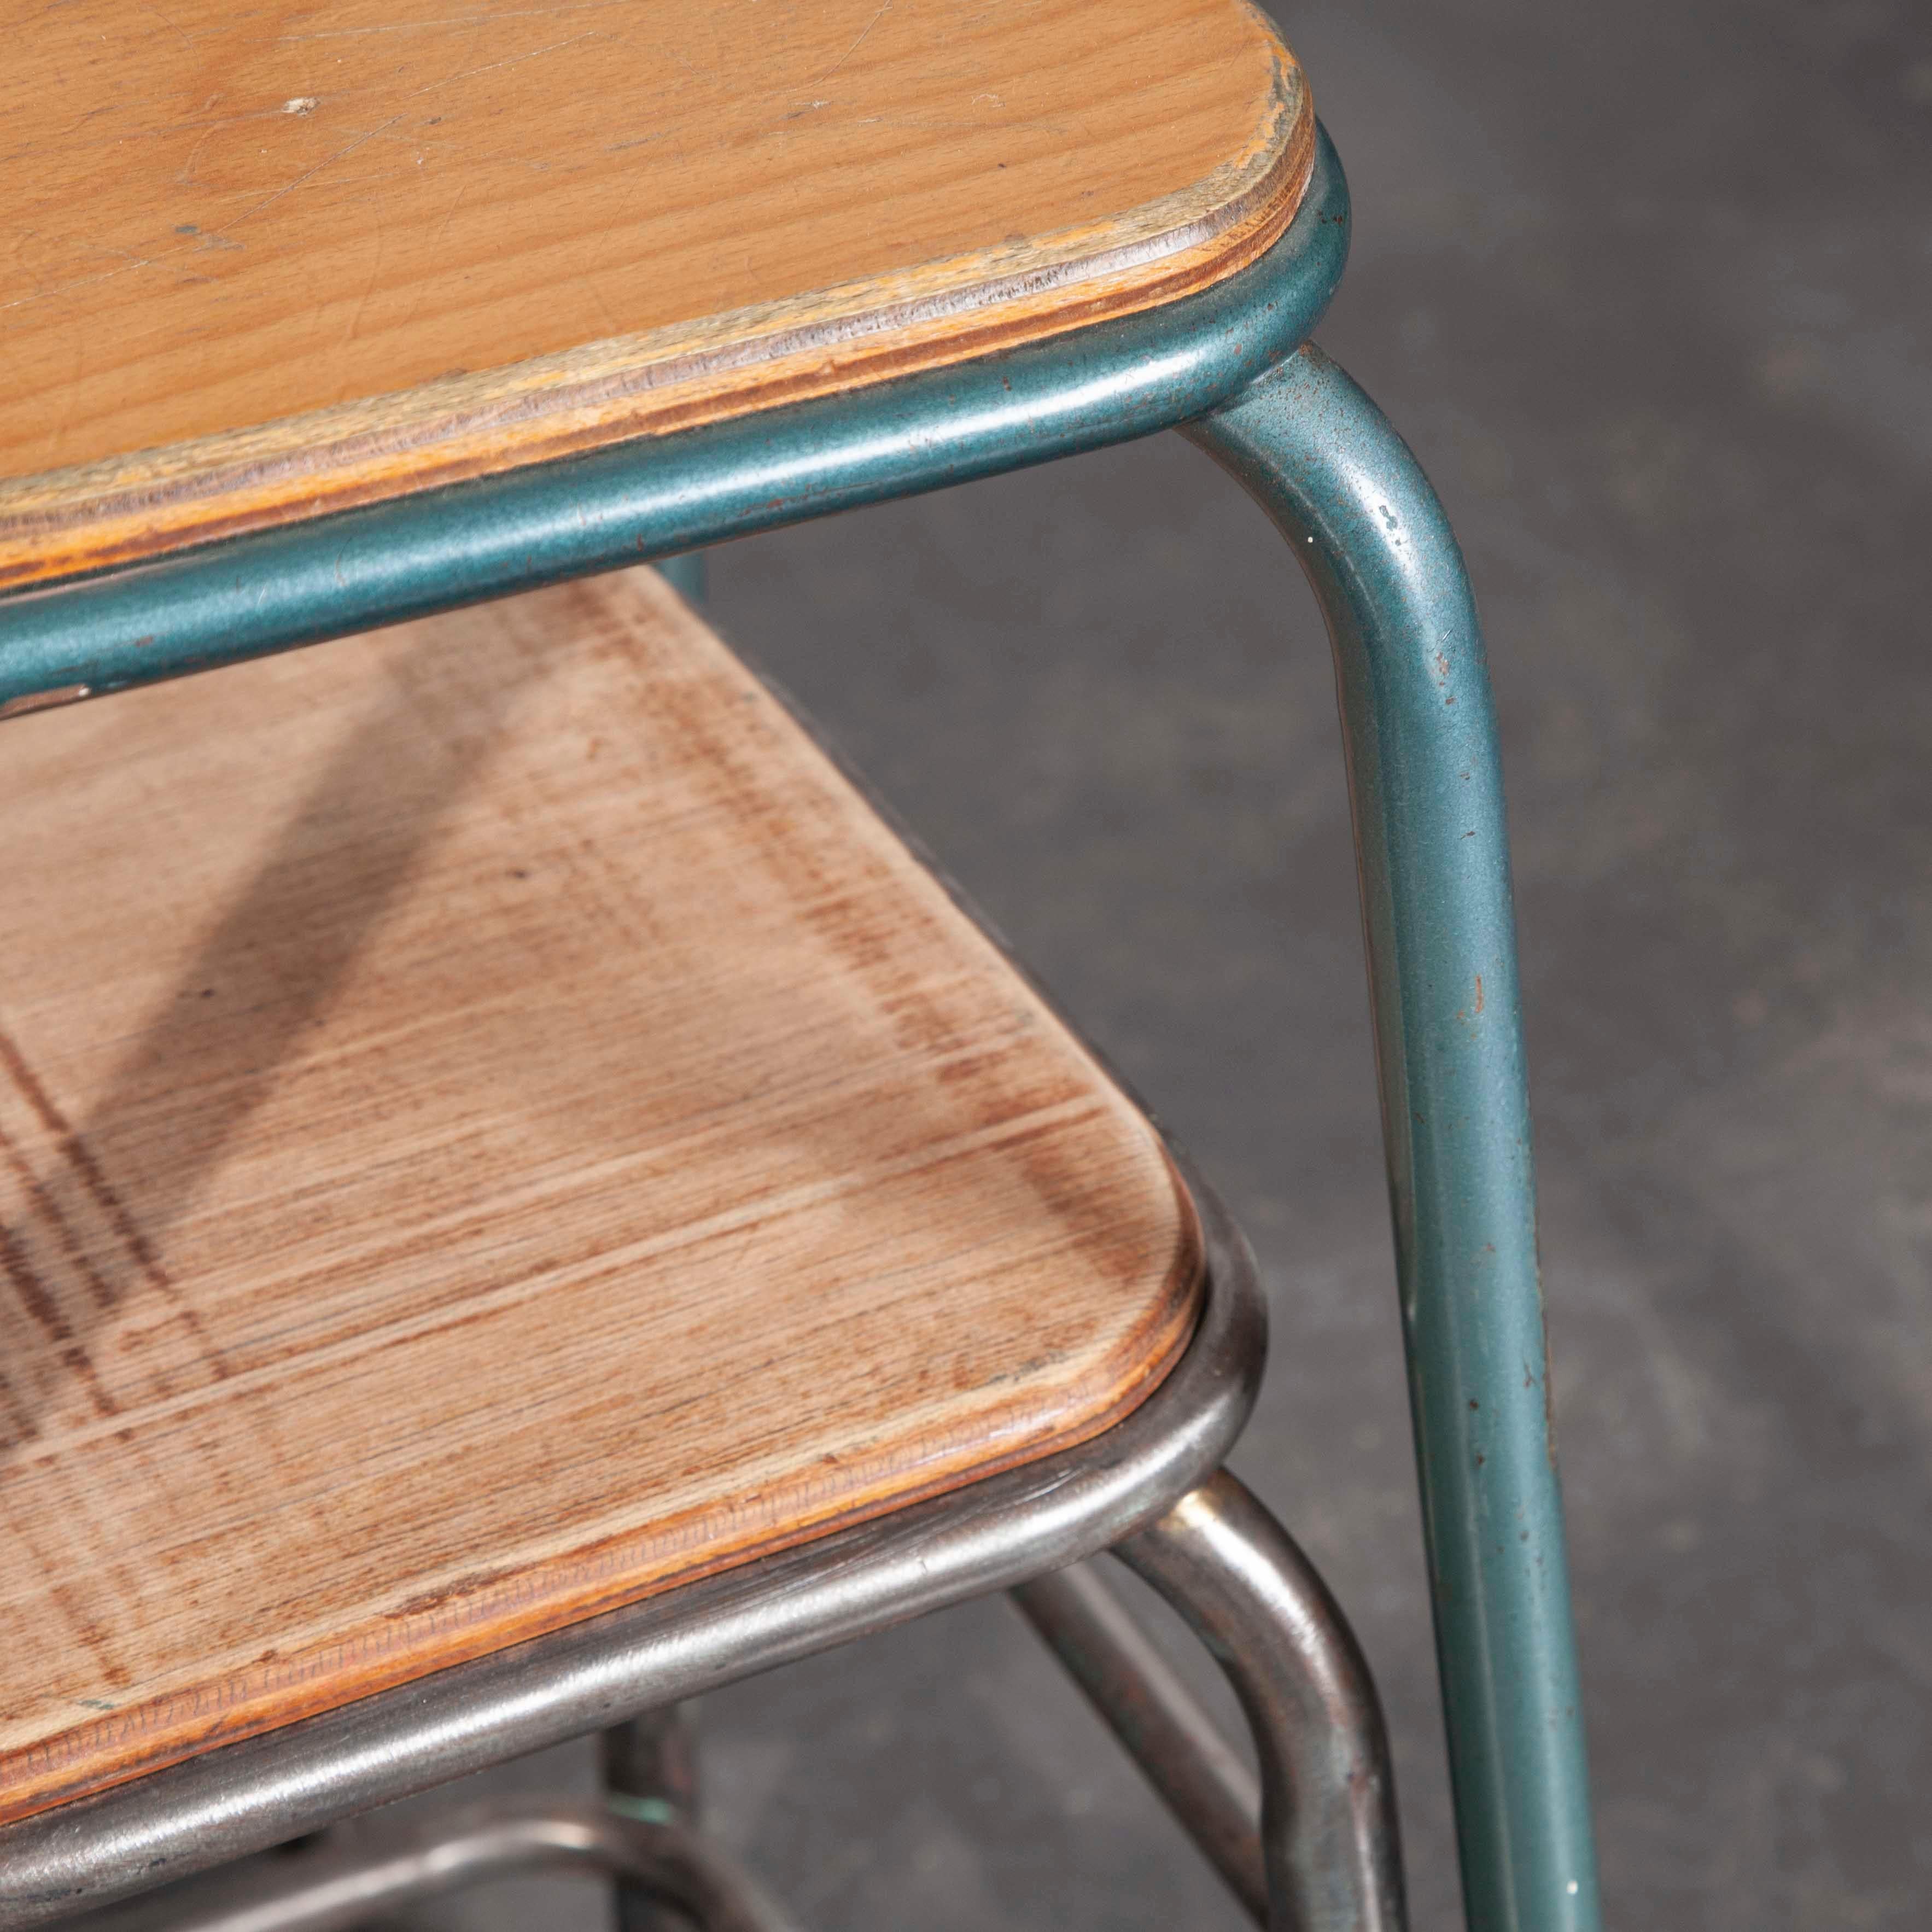 1950s vintage Mullica industrial French stacking high stools, various quantities available.
950’s vintage Mullica industrial French stacking high stools – various quantities available. We have a number of stools available and are selling them in any